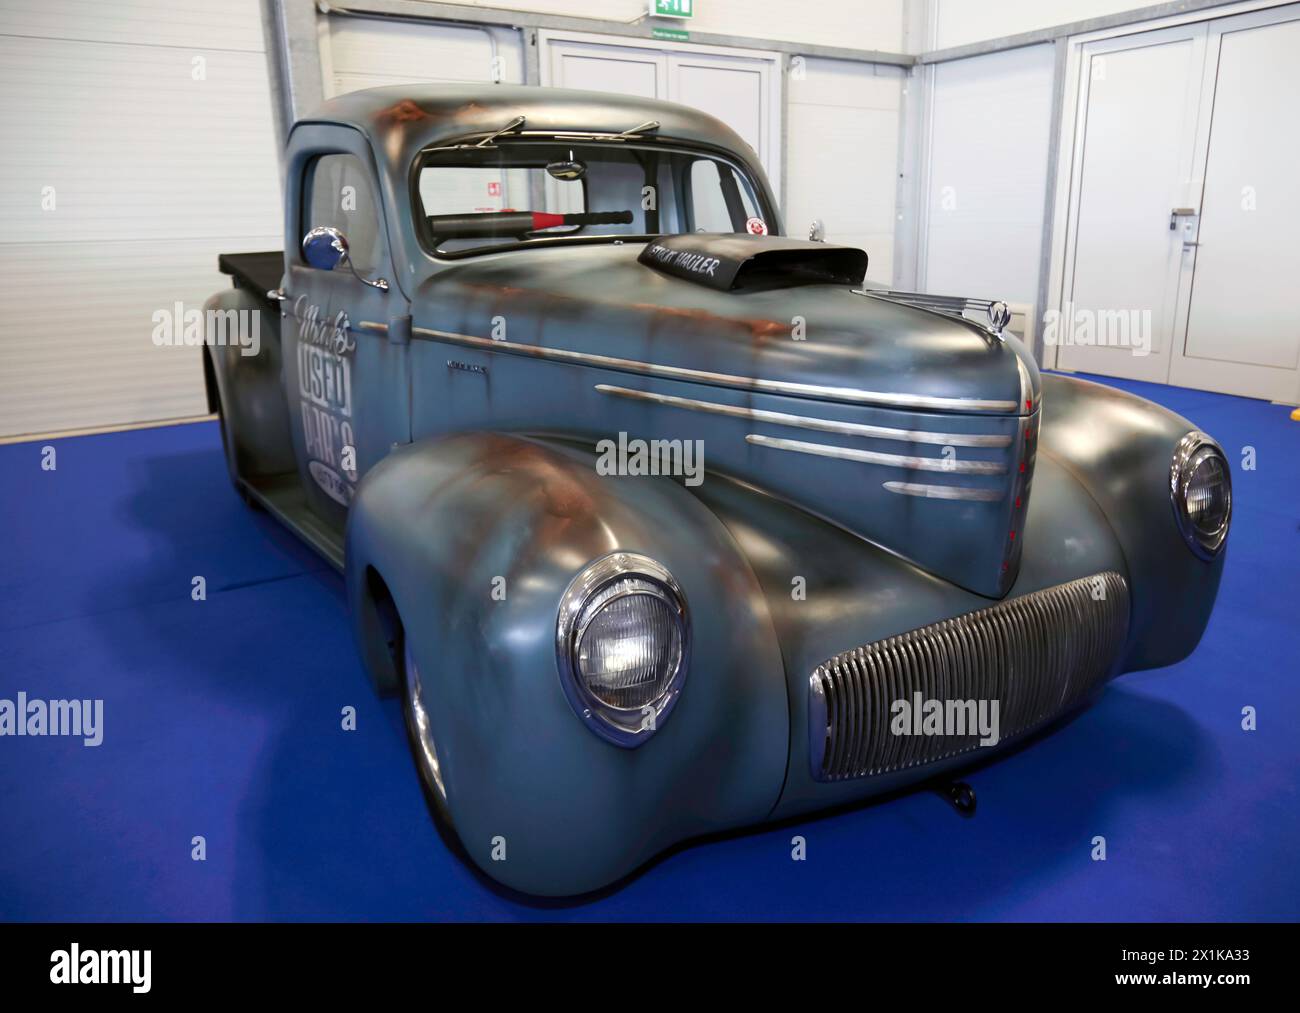 Three-quarters front view of an American,  Customized, Rat Rod, Classic Pickup Van, on display at the 2023 British Motor Show Stock Photo